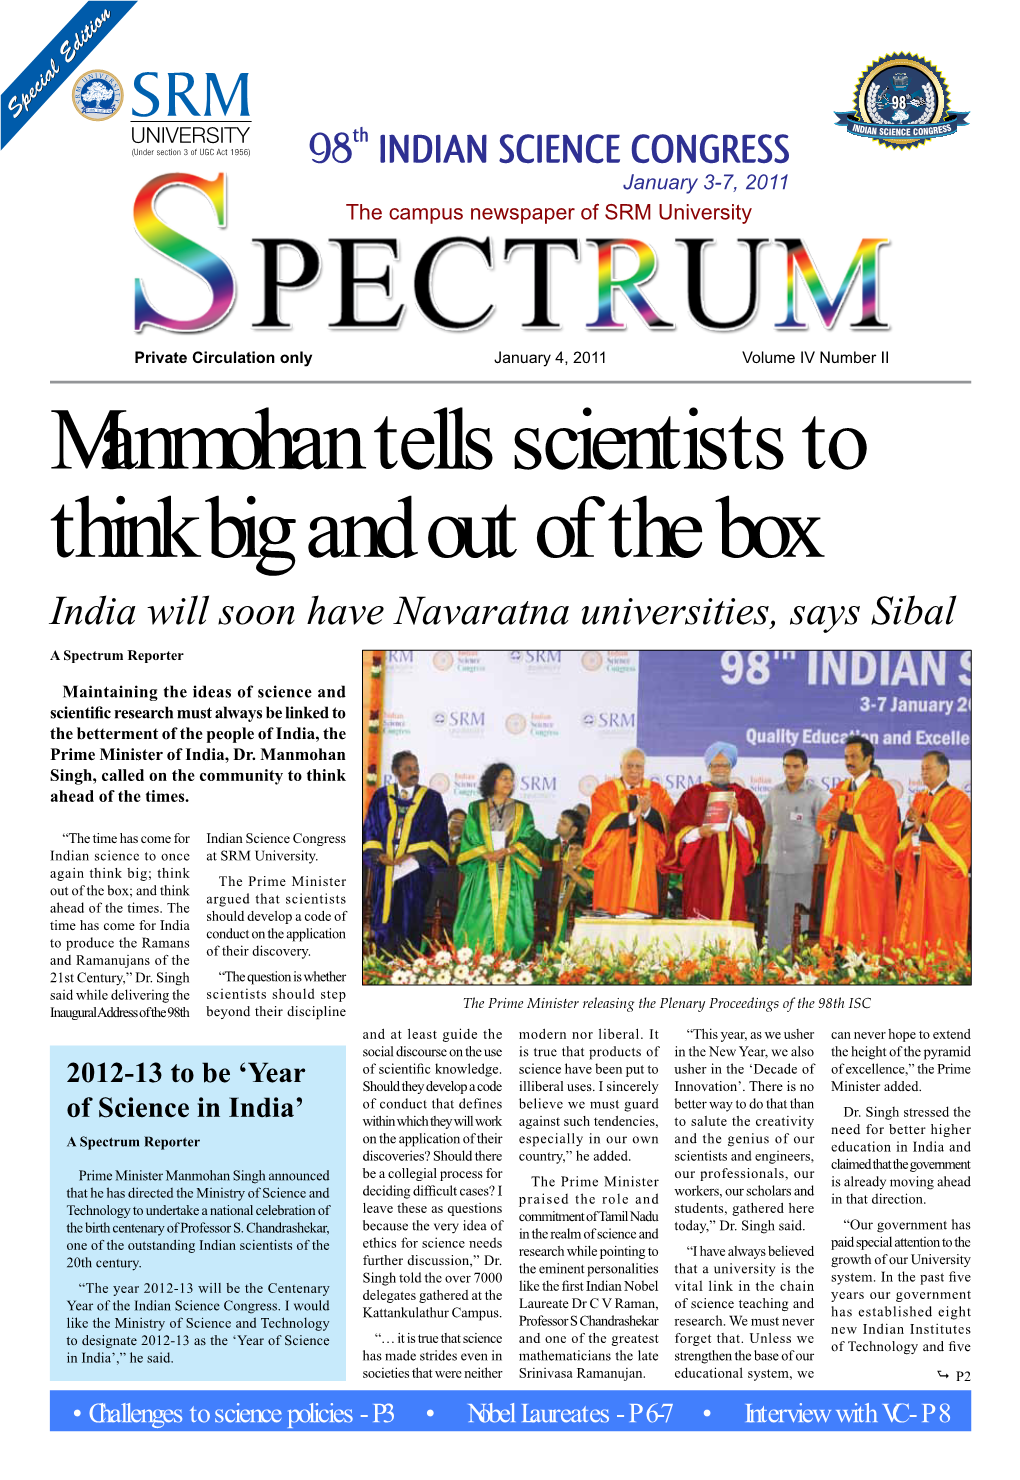 Manmohan Tells Scientists to Think Big and out of the Box India Will Soon Have Navaratna Universities, Says Sibal a Spectrum Reporter